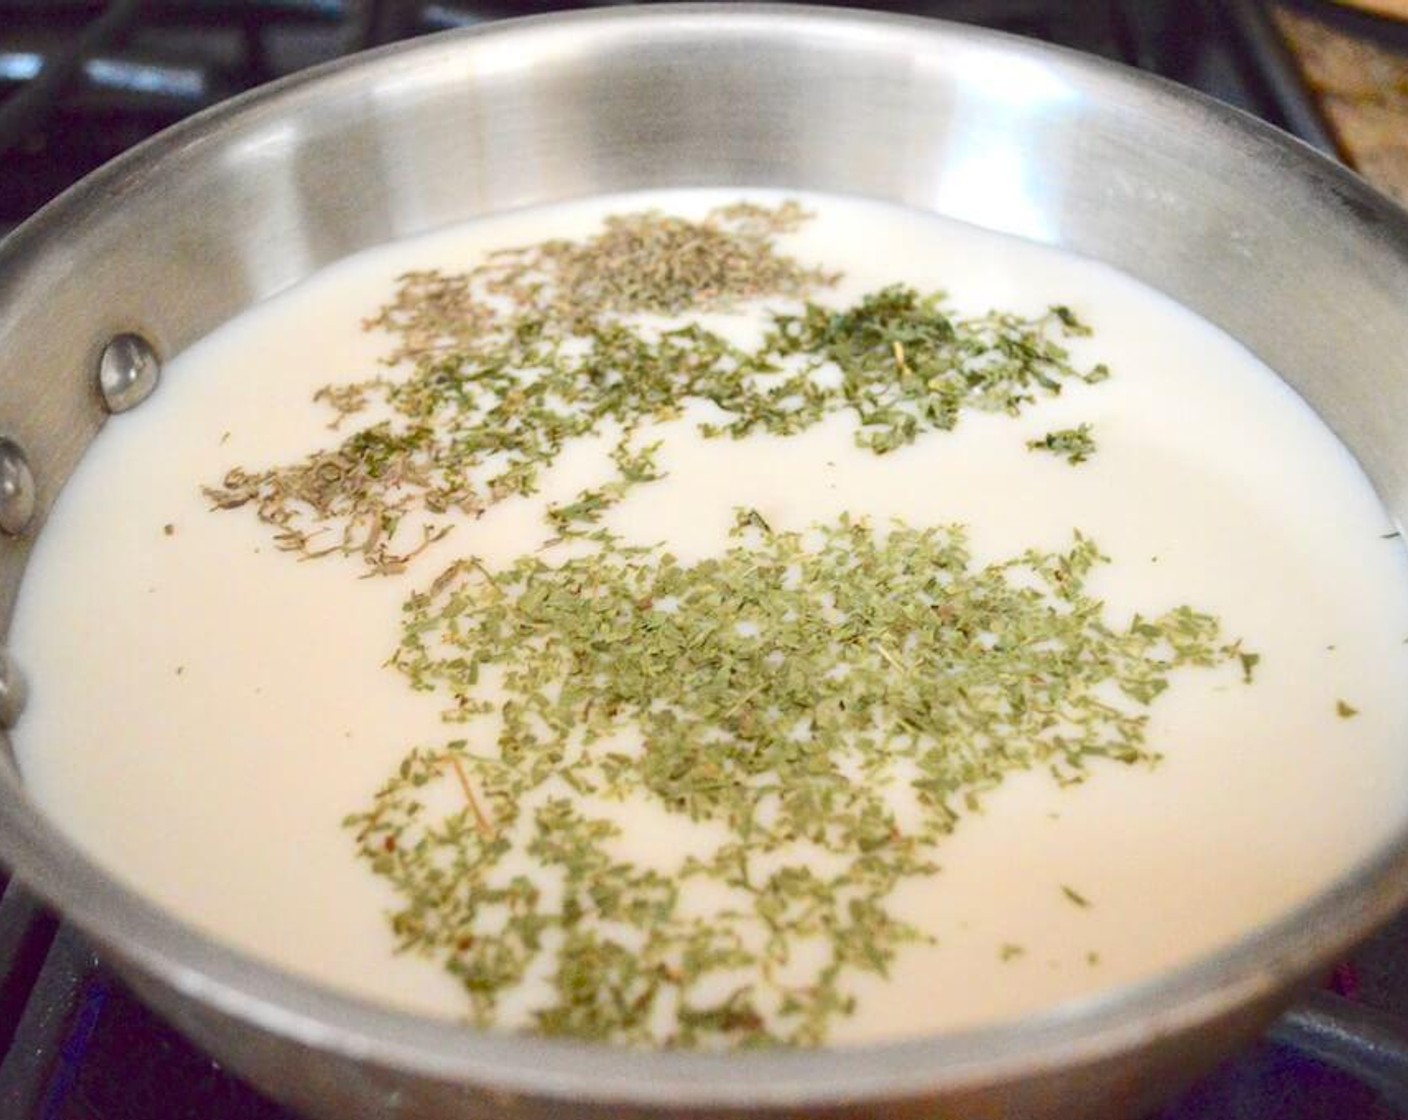 step 2 Then combine the Milk (2 cups), Chicken Stock (2 cups), Garlic (3 cloves), Dried Parsley (1/2 tsp), Dried Tarragon (1/2 tsp), Salt (1 pinch), and Dried Thyme (1/2 tsp) in the saucepan and bring the mixture to a gentle boil over medium high heat. Whisk it a few times to stir it all together.